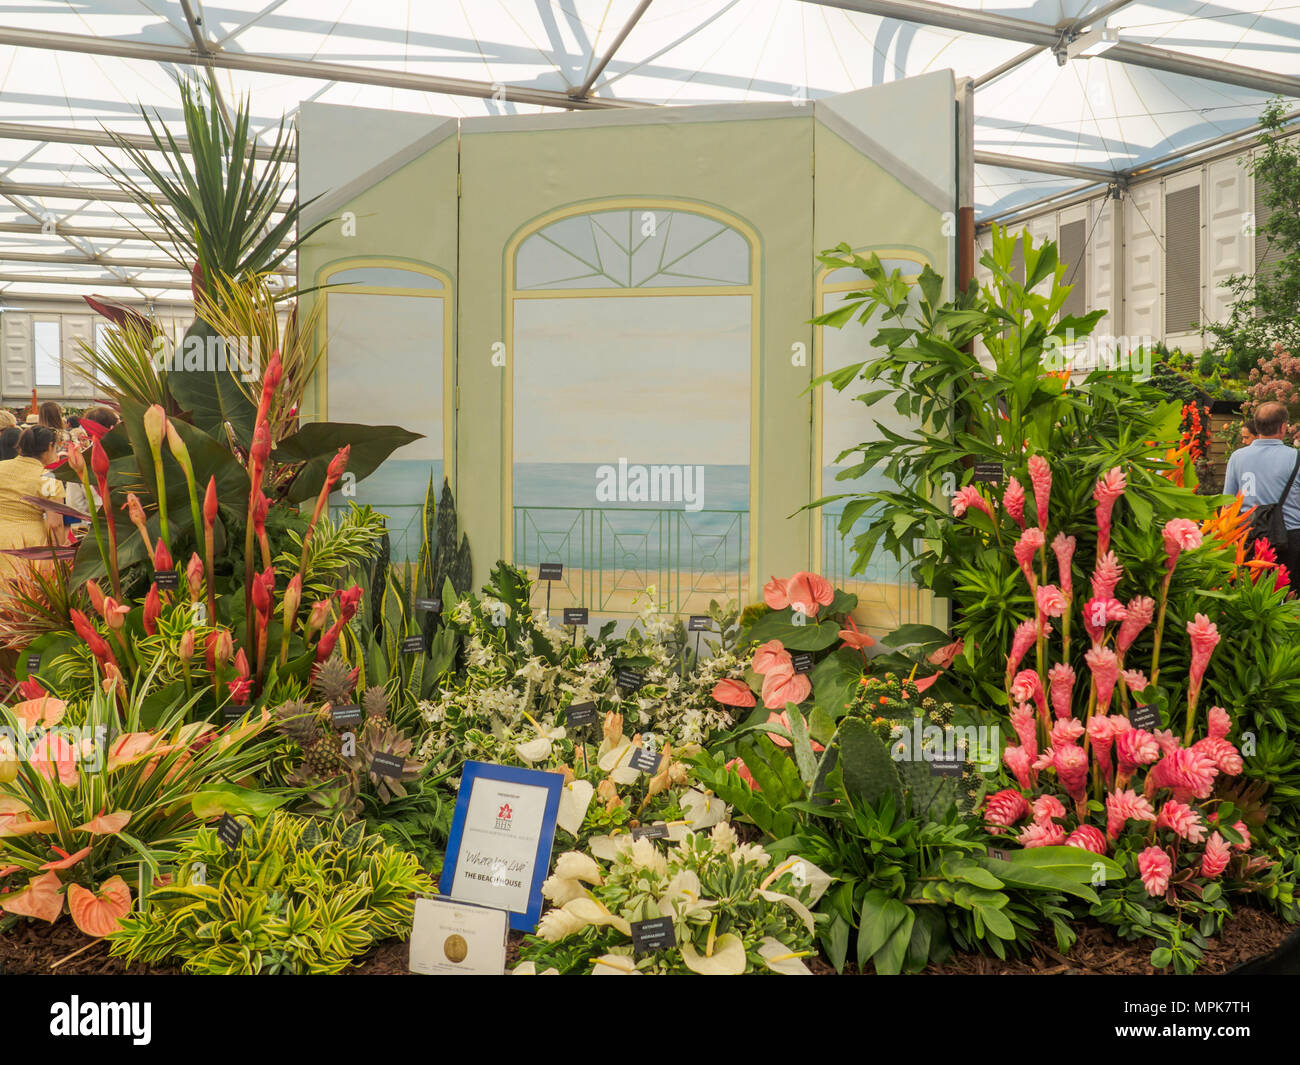 rhs chelsea flower show 2017. a barbados horticultural society